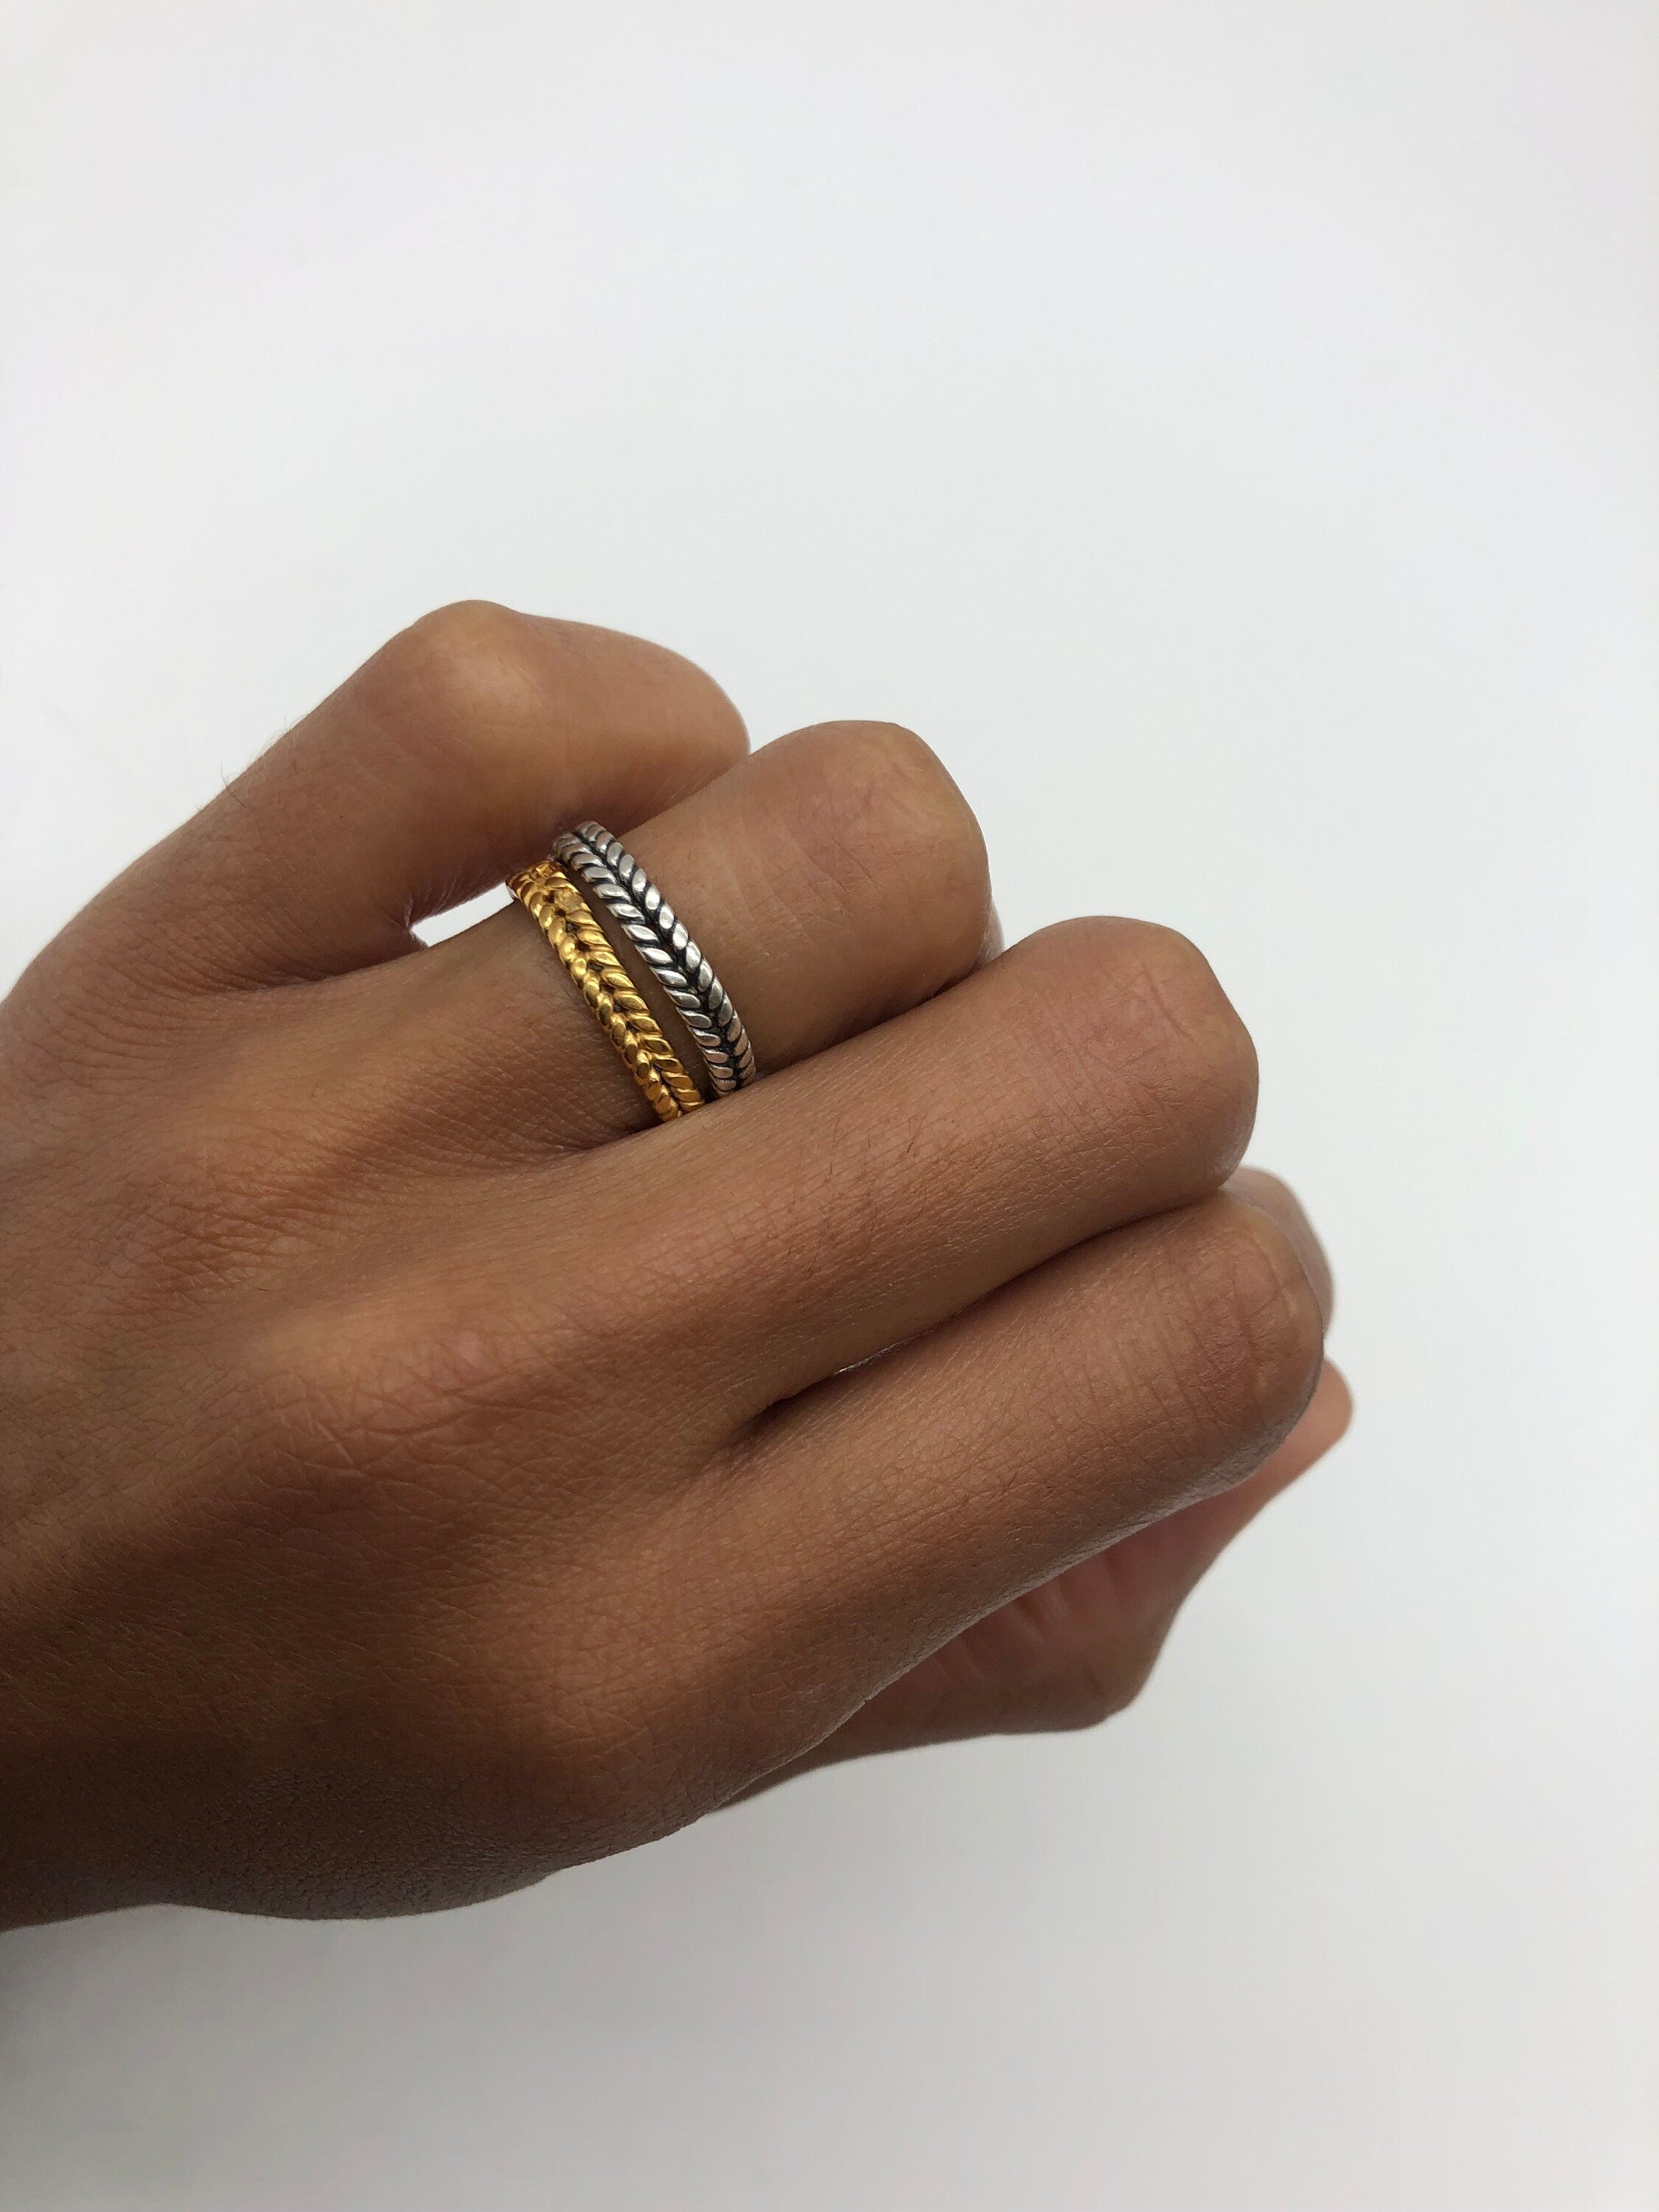 Gold Braided Boho Ring, Stackable Gold Ring, Vintage Ring, Minimalist Gold Band, 18k Gold Vermeil